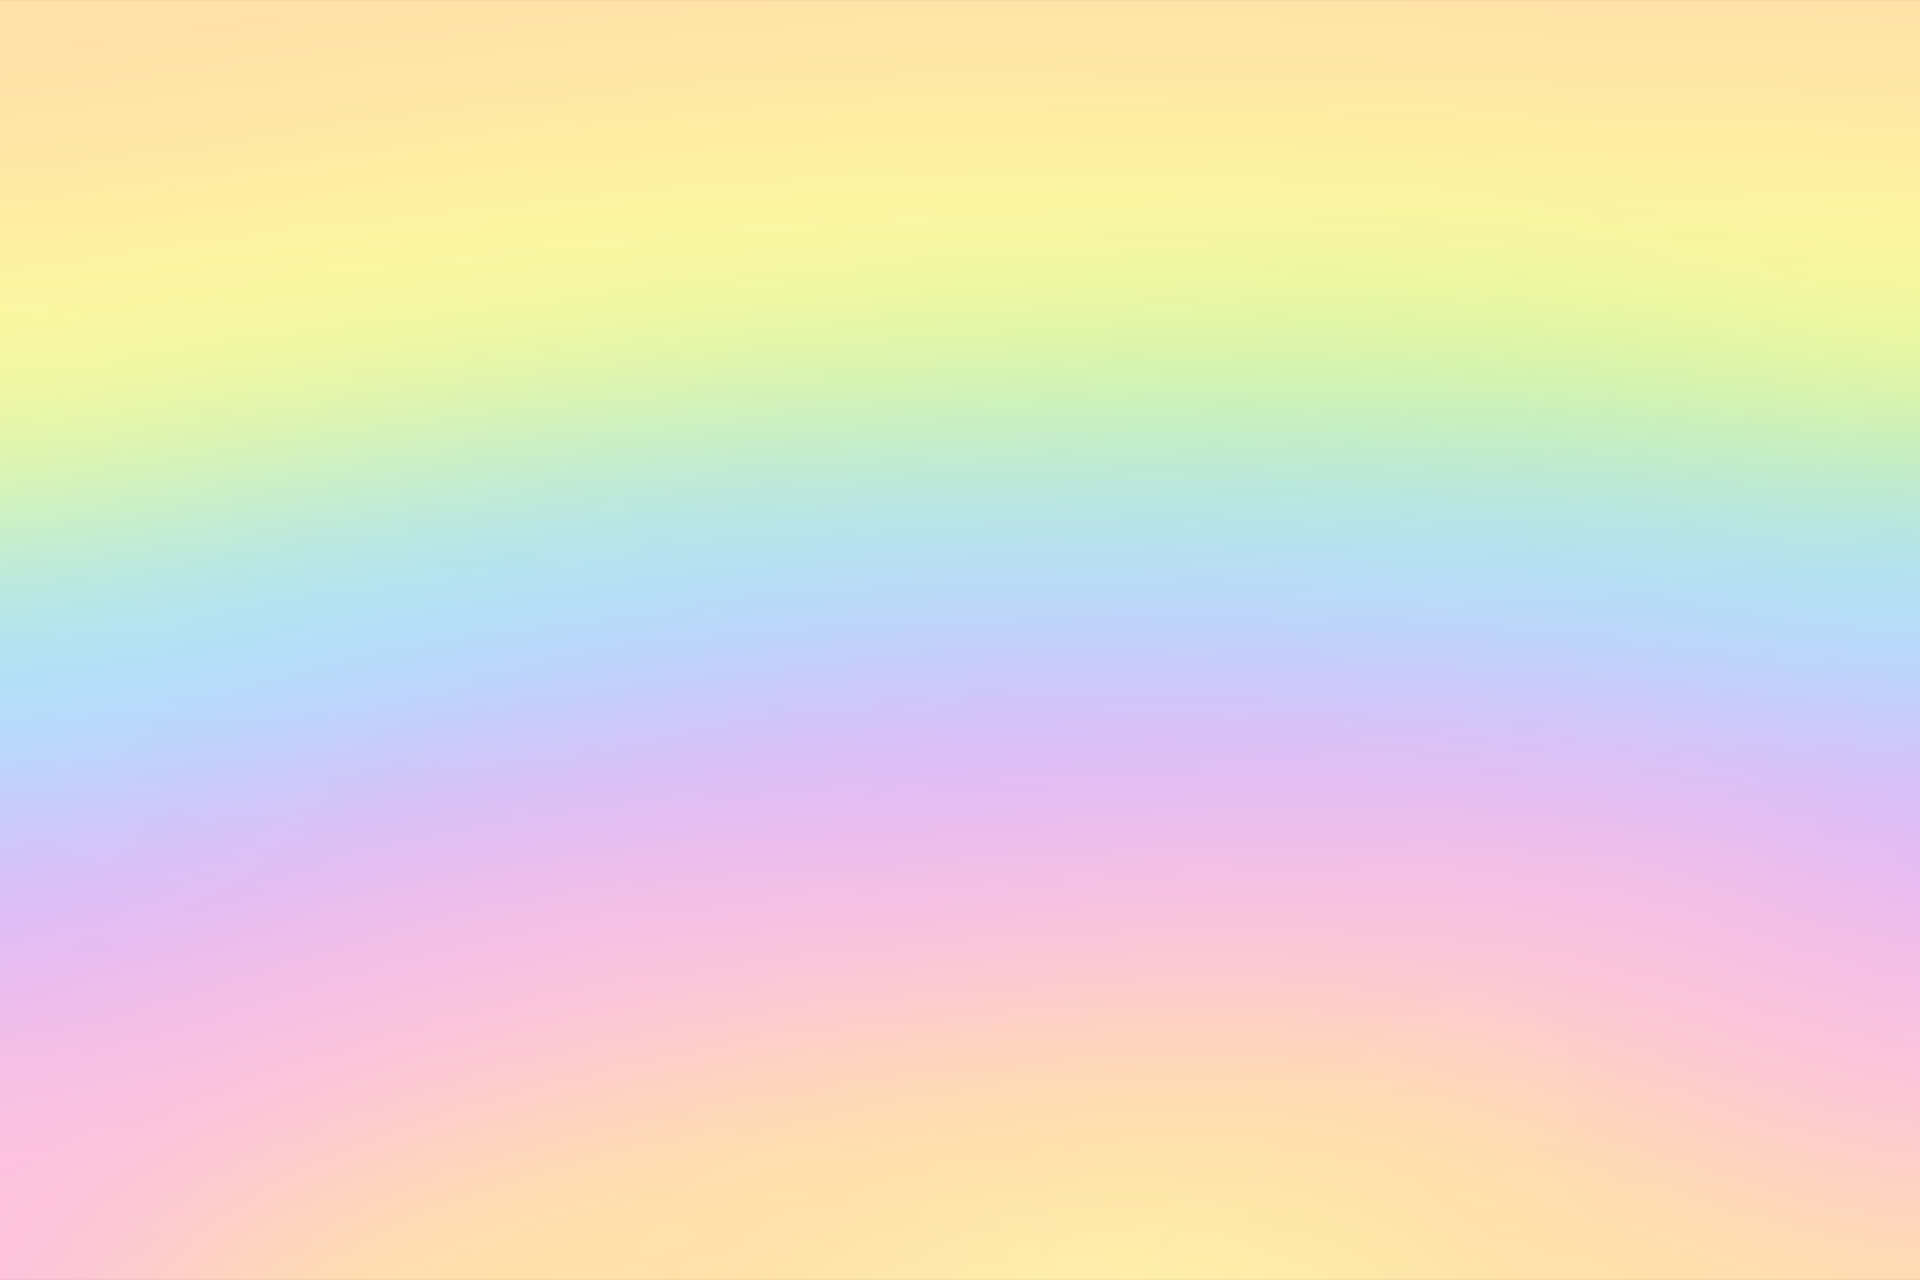 Unlock the colors of the rainbow with this dreamy pastel rainbow background